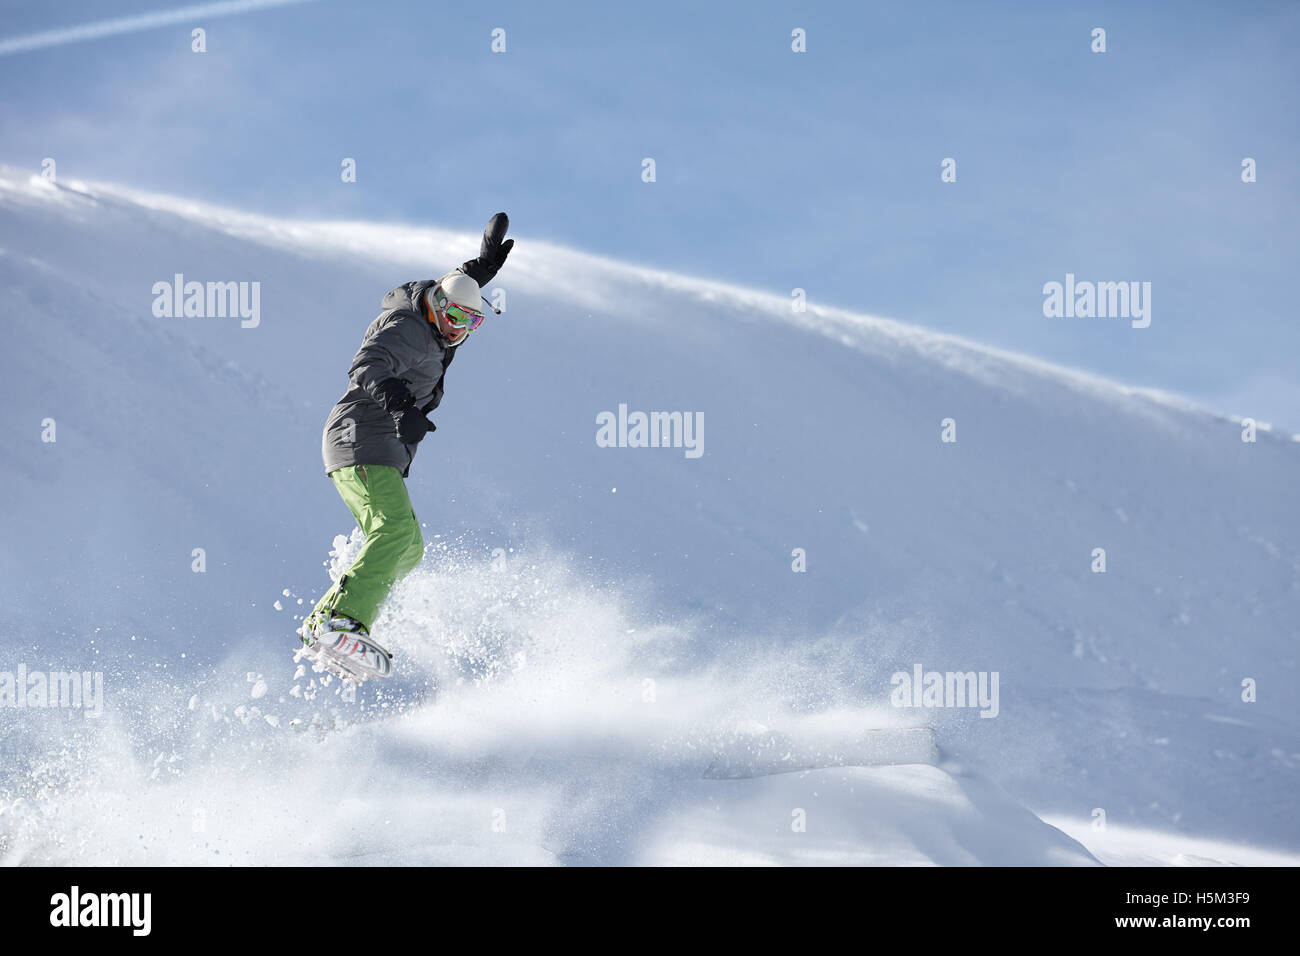 Snowboarder jumping against snow slope background Stock Photo